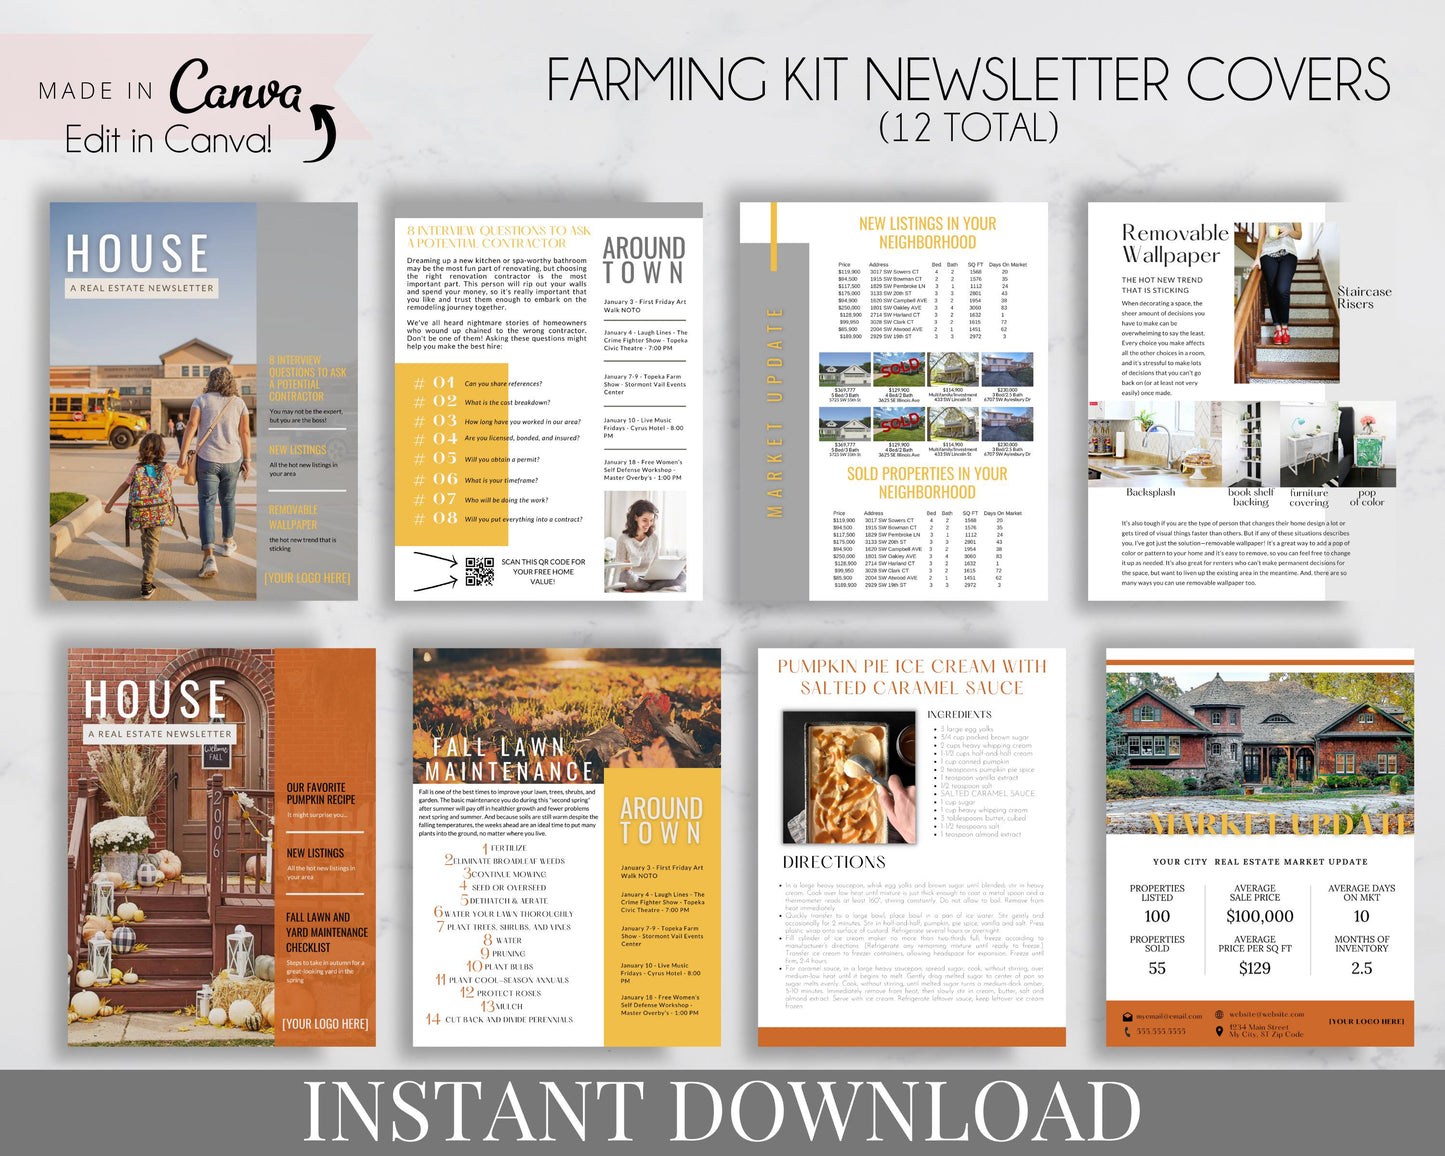 Real Estate Farming Kit Marketing for Realtors, Agents - Instant Download - 12 Monthly Farming Kit Newsletter Covers Templates